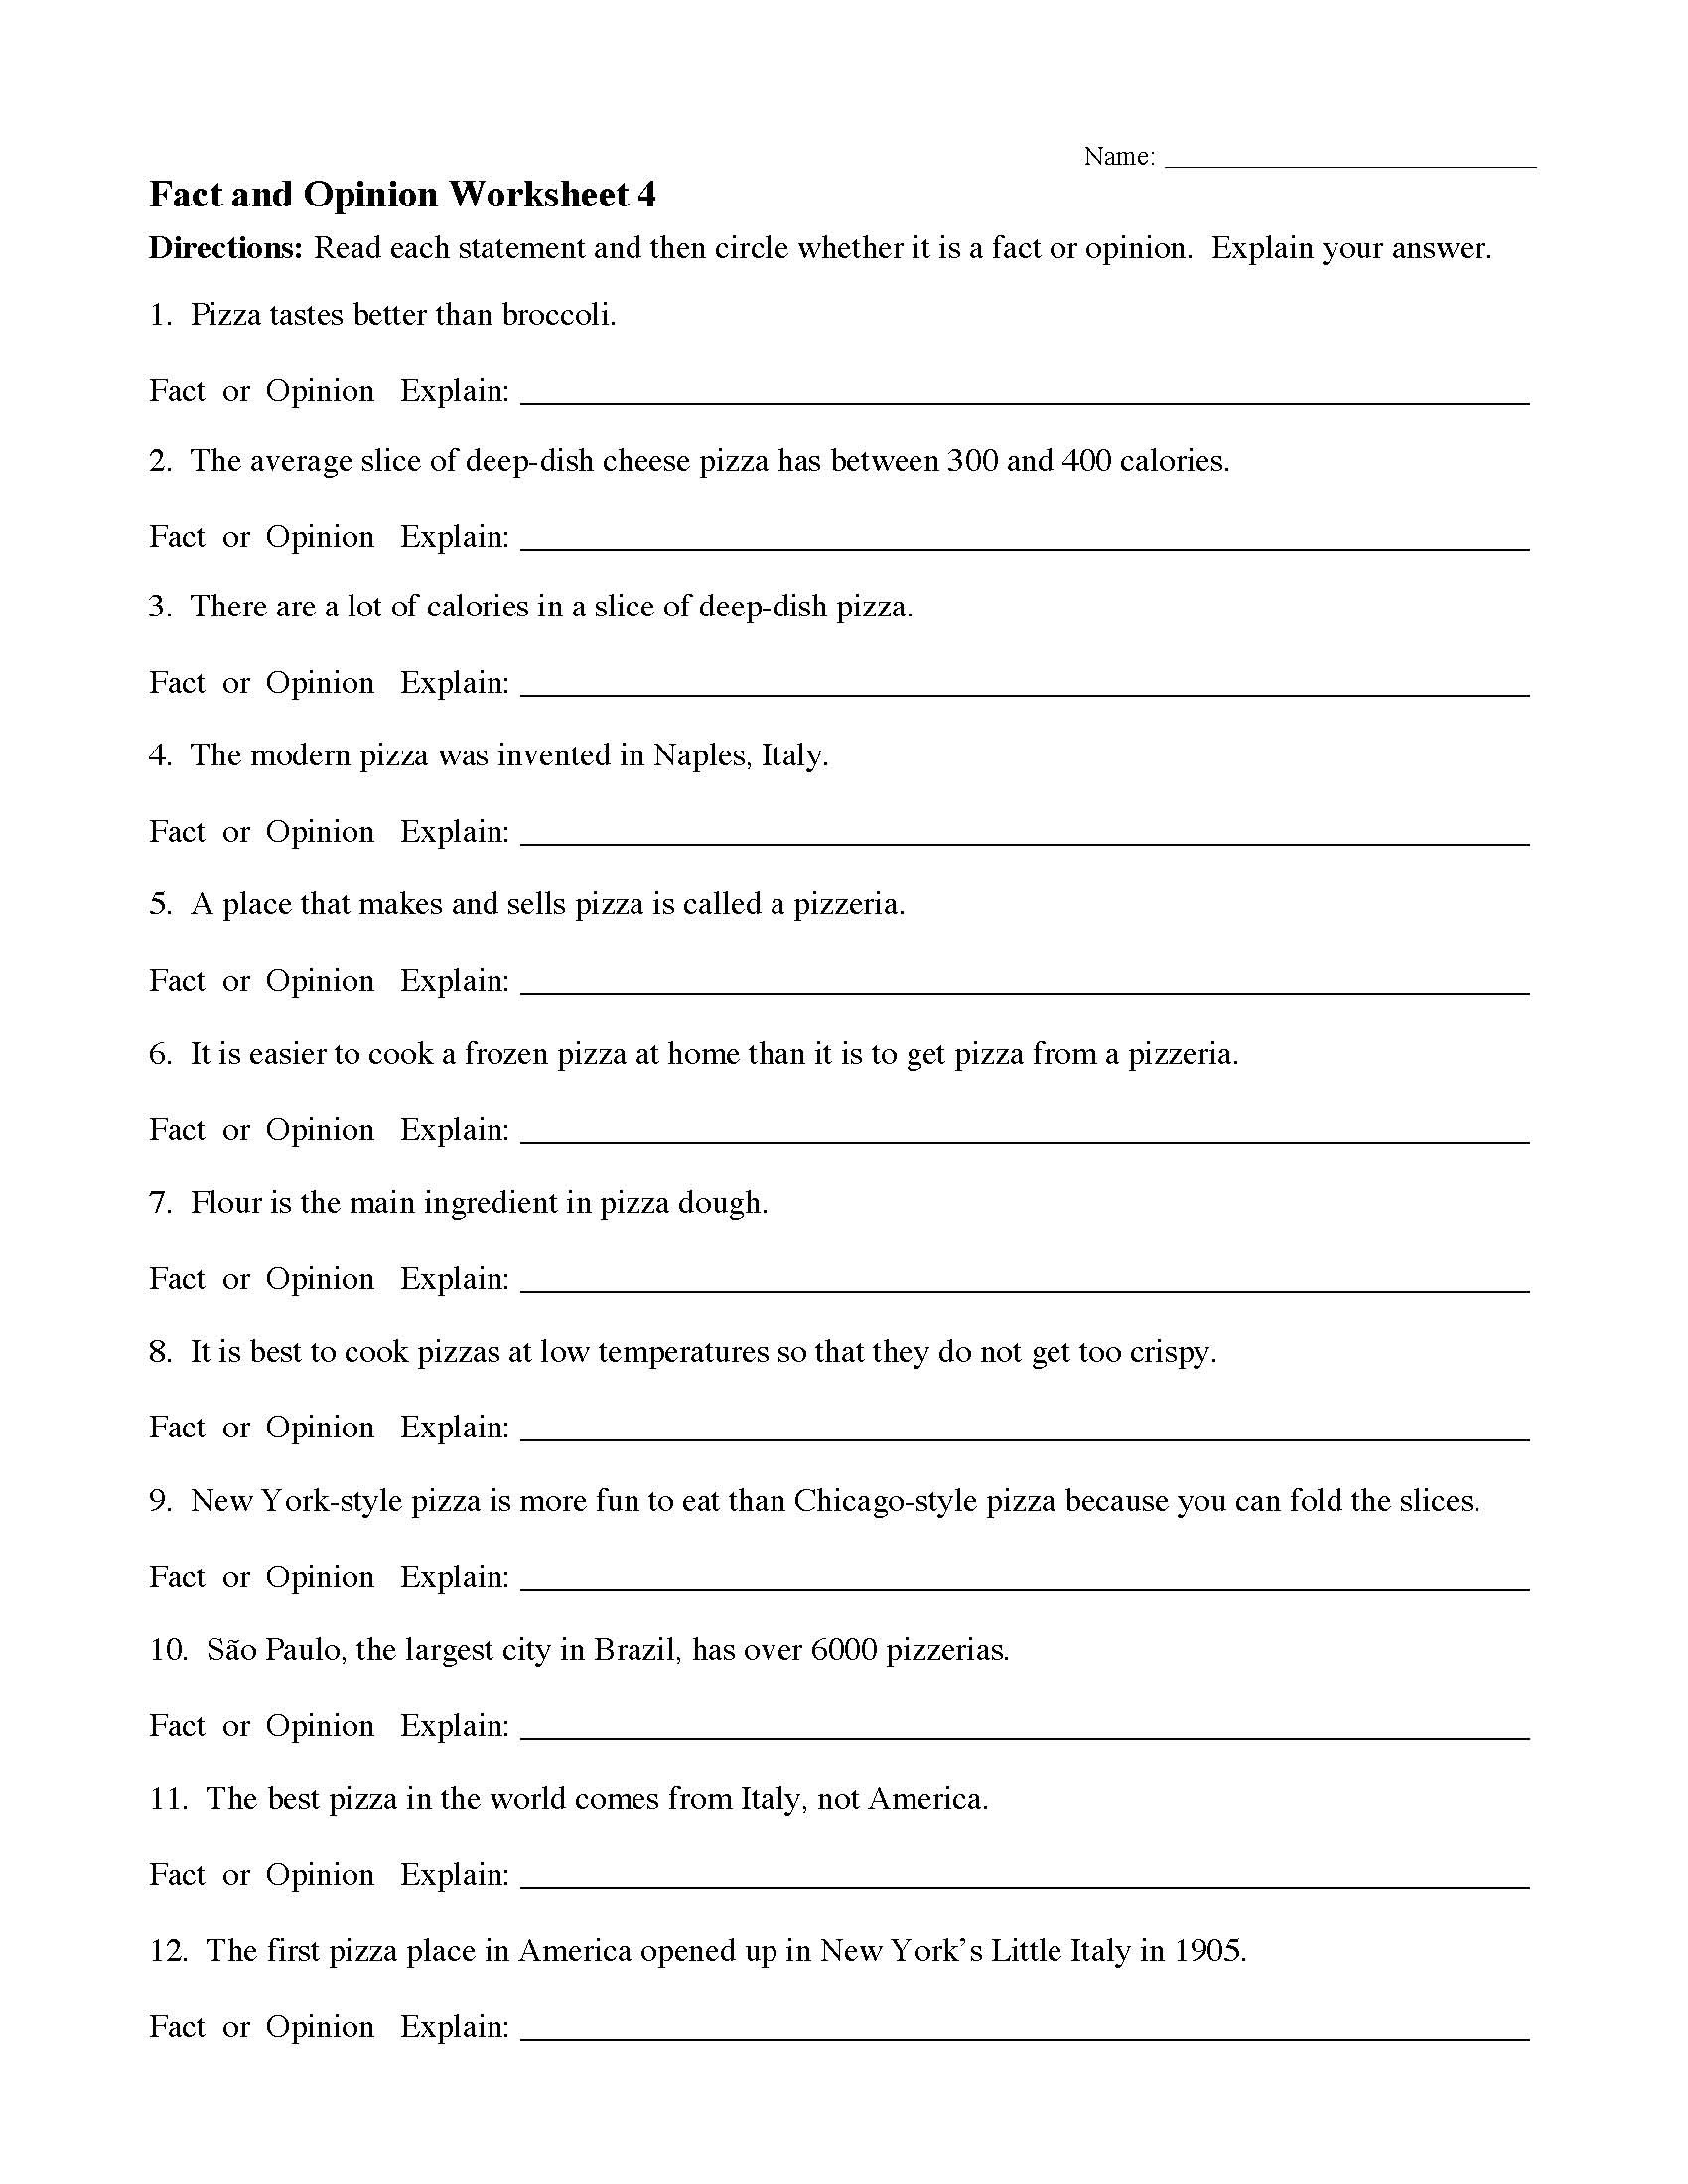 The Core Movie Worksheet Answers Fact and Opinion Worksheets